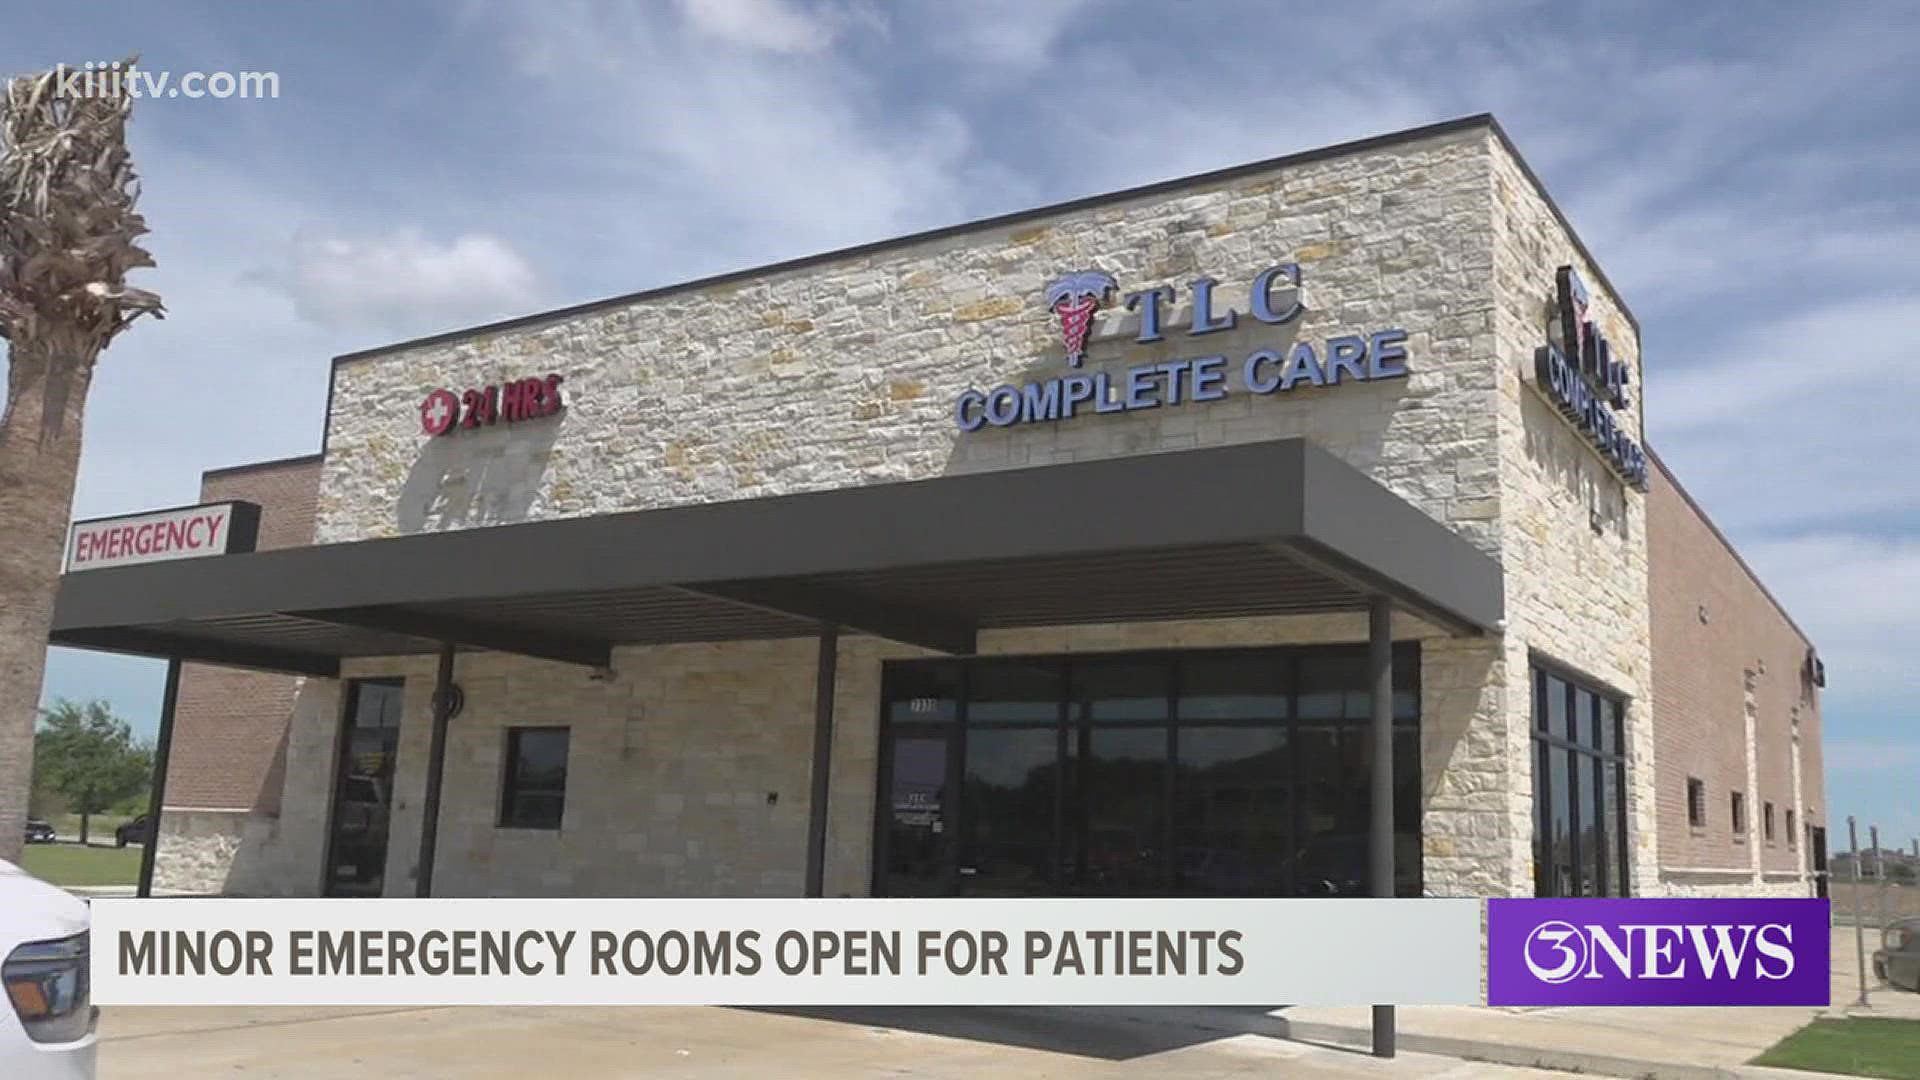 Their volume of patients has grown tremendously, which can lead to a higher wait time, but doctors say they haven’t turned anyone away who needs care.